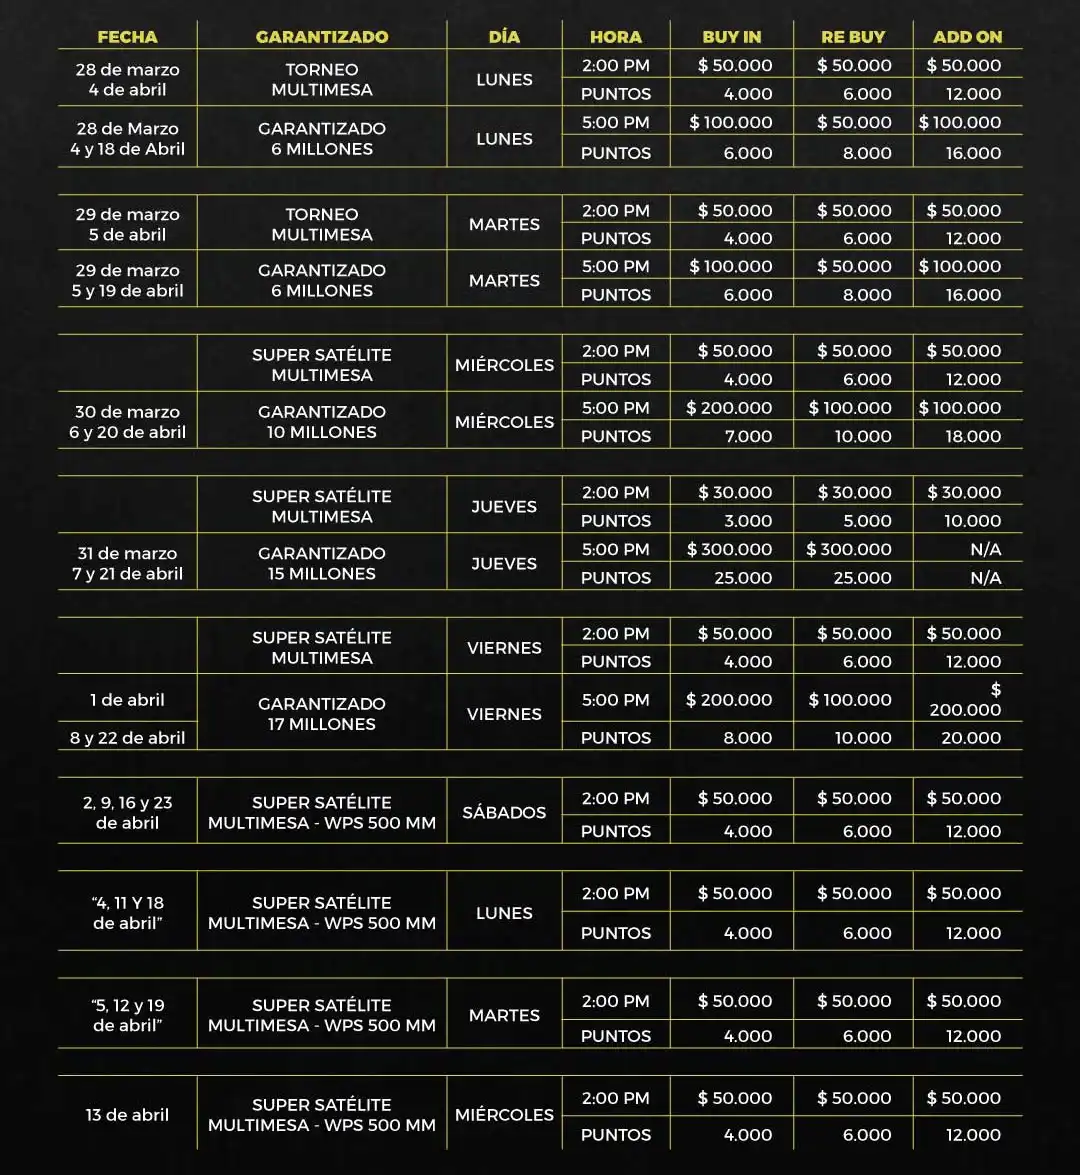 The Winner Poker Series 2022 Returns to Colombia With $150.000 Guaranteed